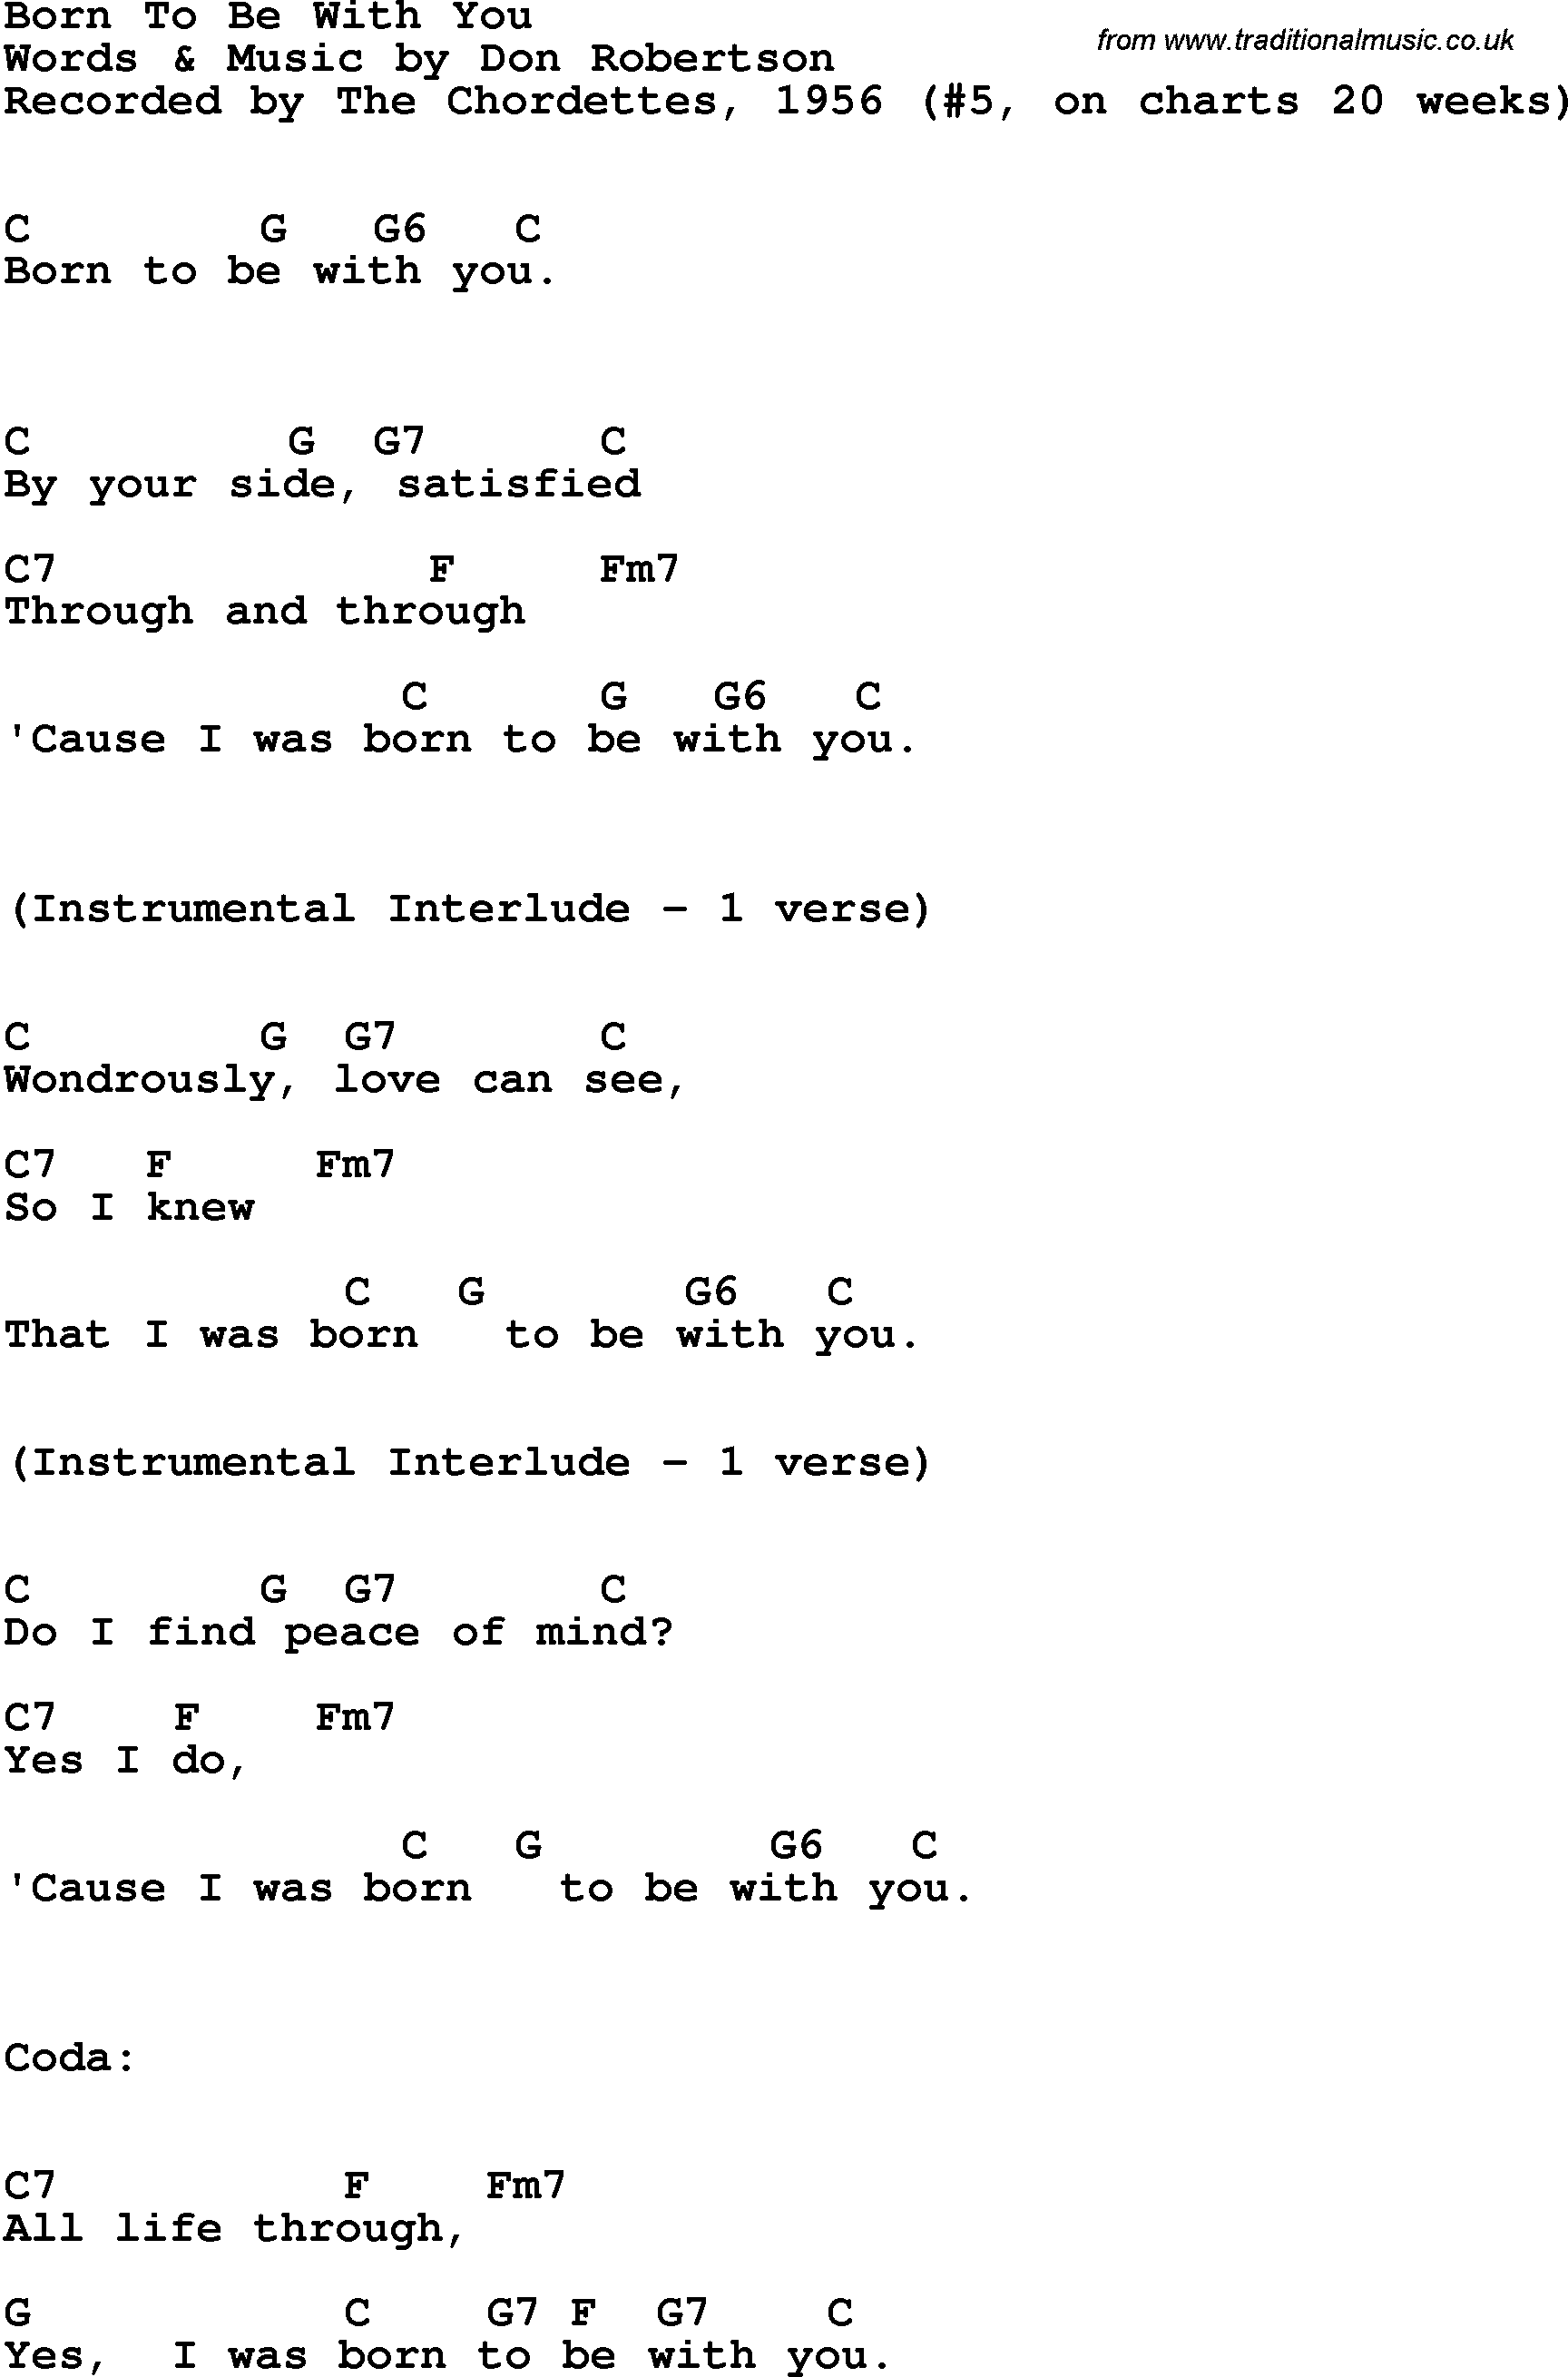 Song Lyrics with guitar chords for Born To Be With You - The Chordettes, 1956